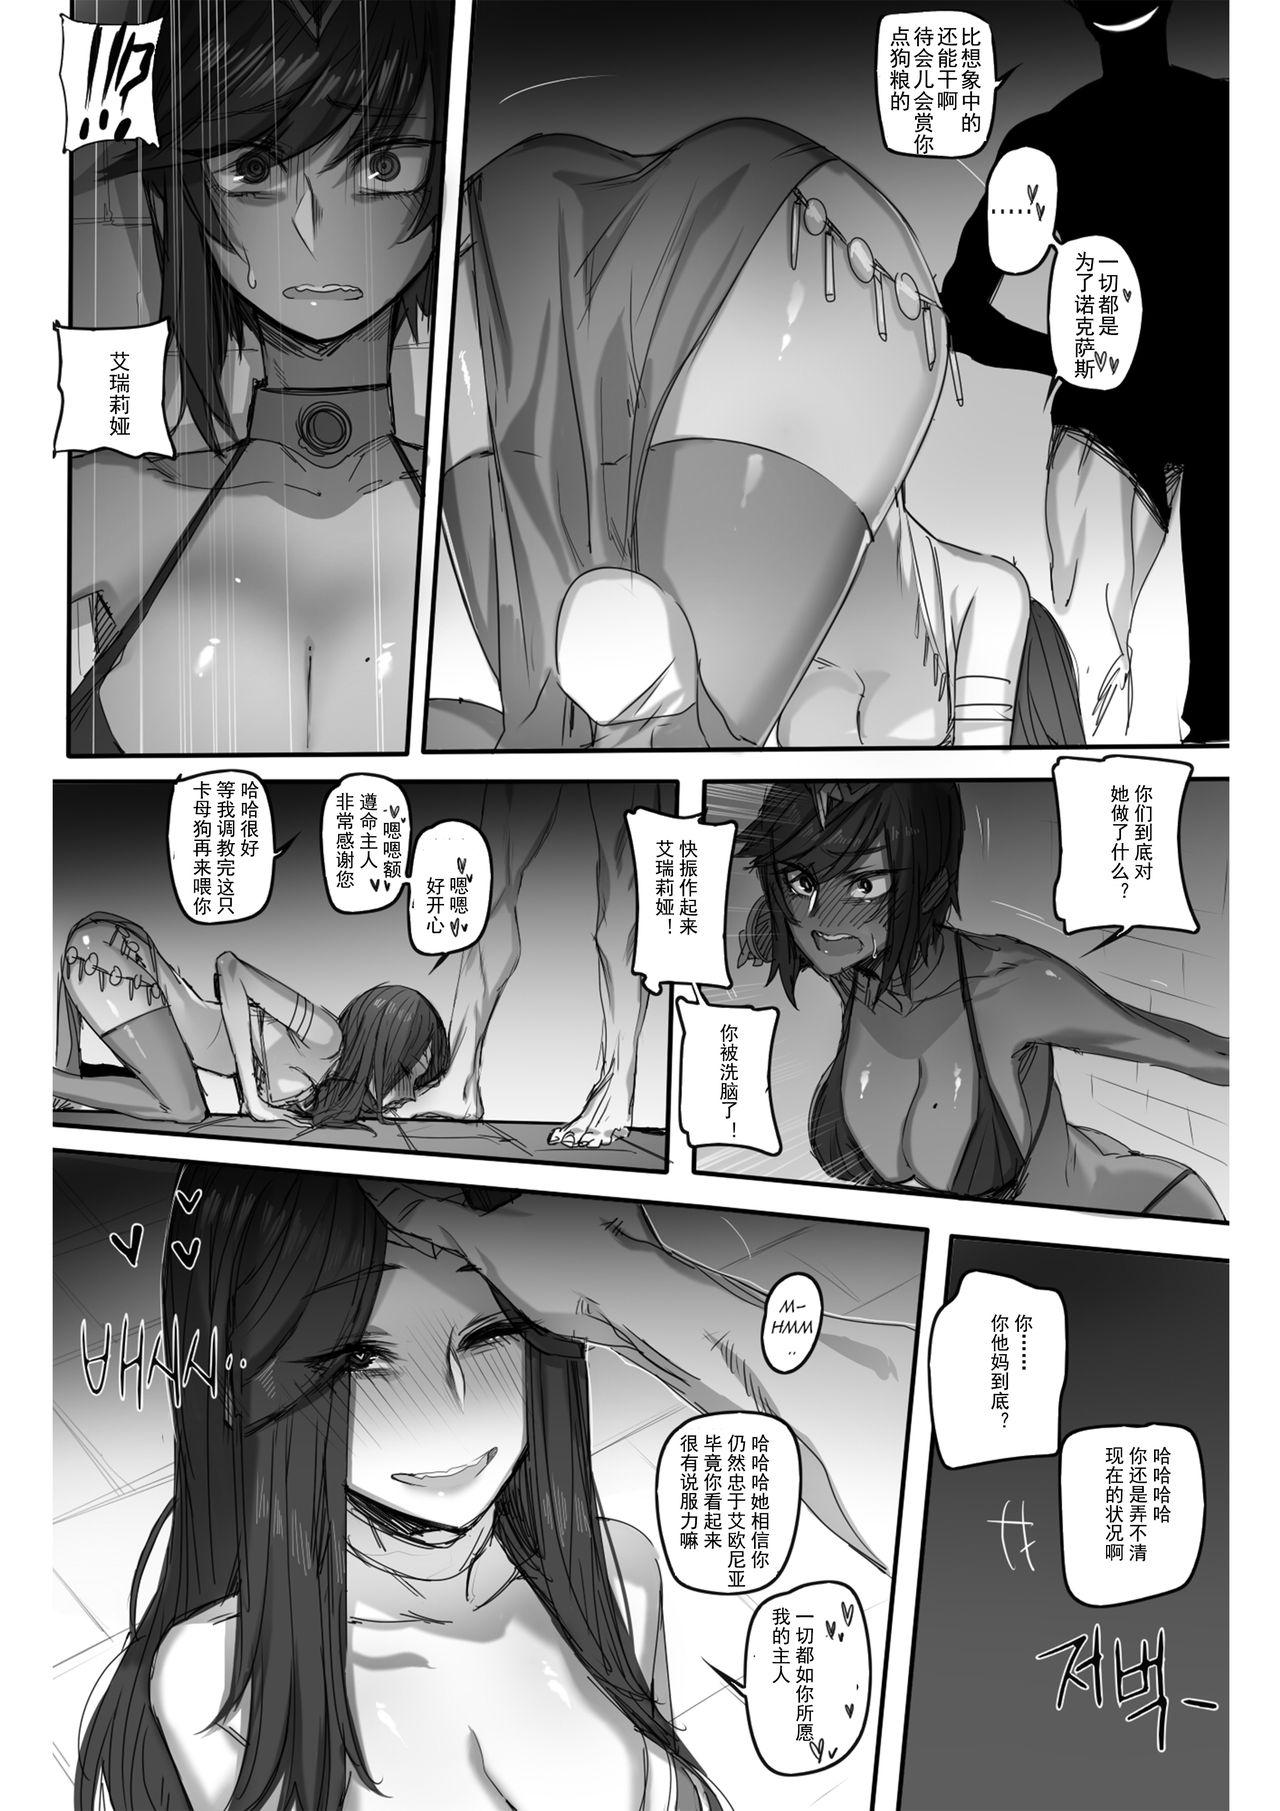 Japanese For the Noxus - League of legends Oral - Page 8